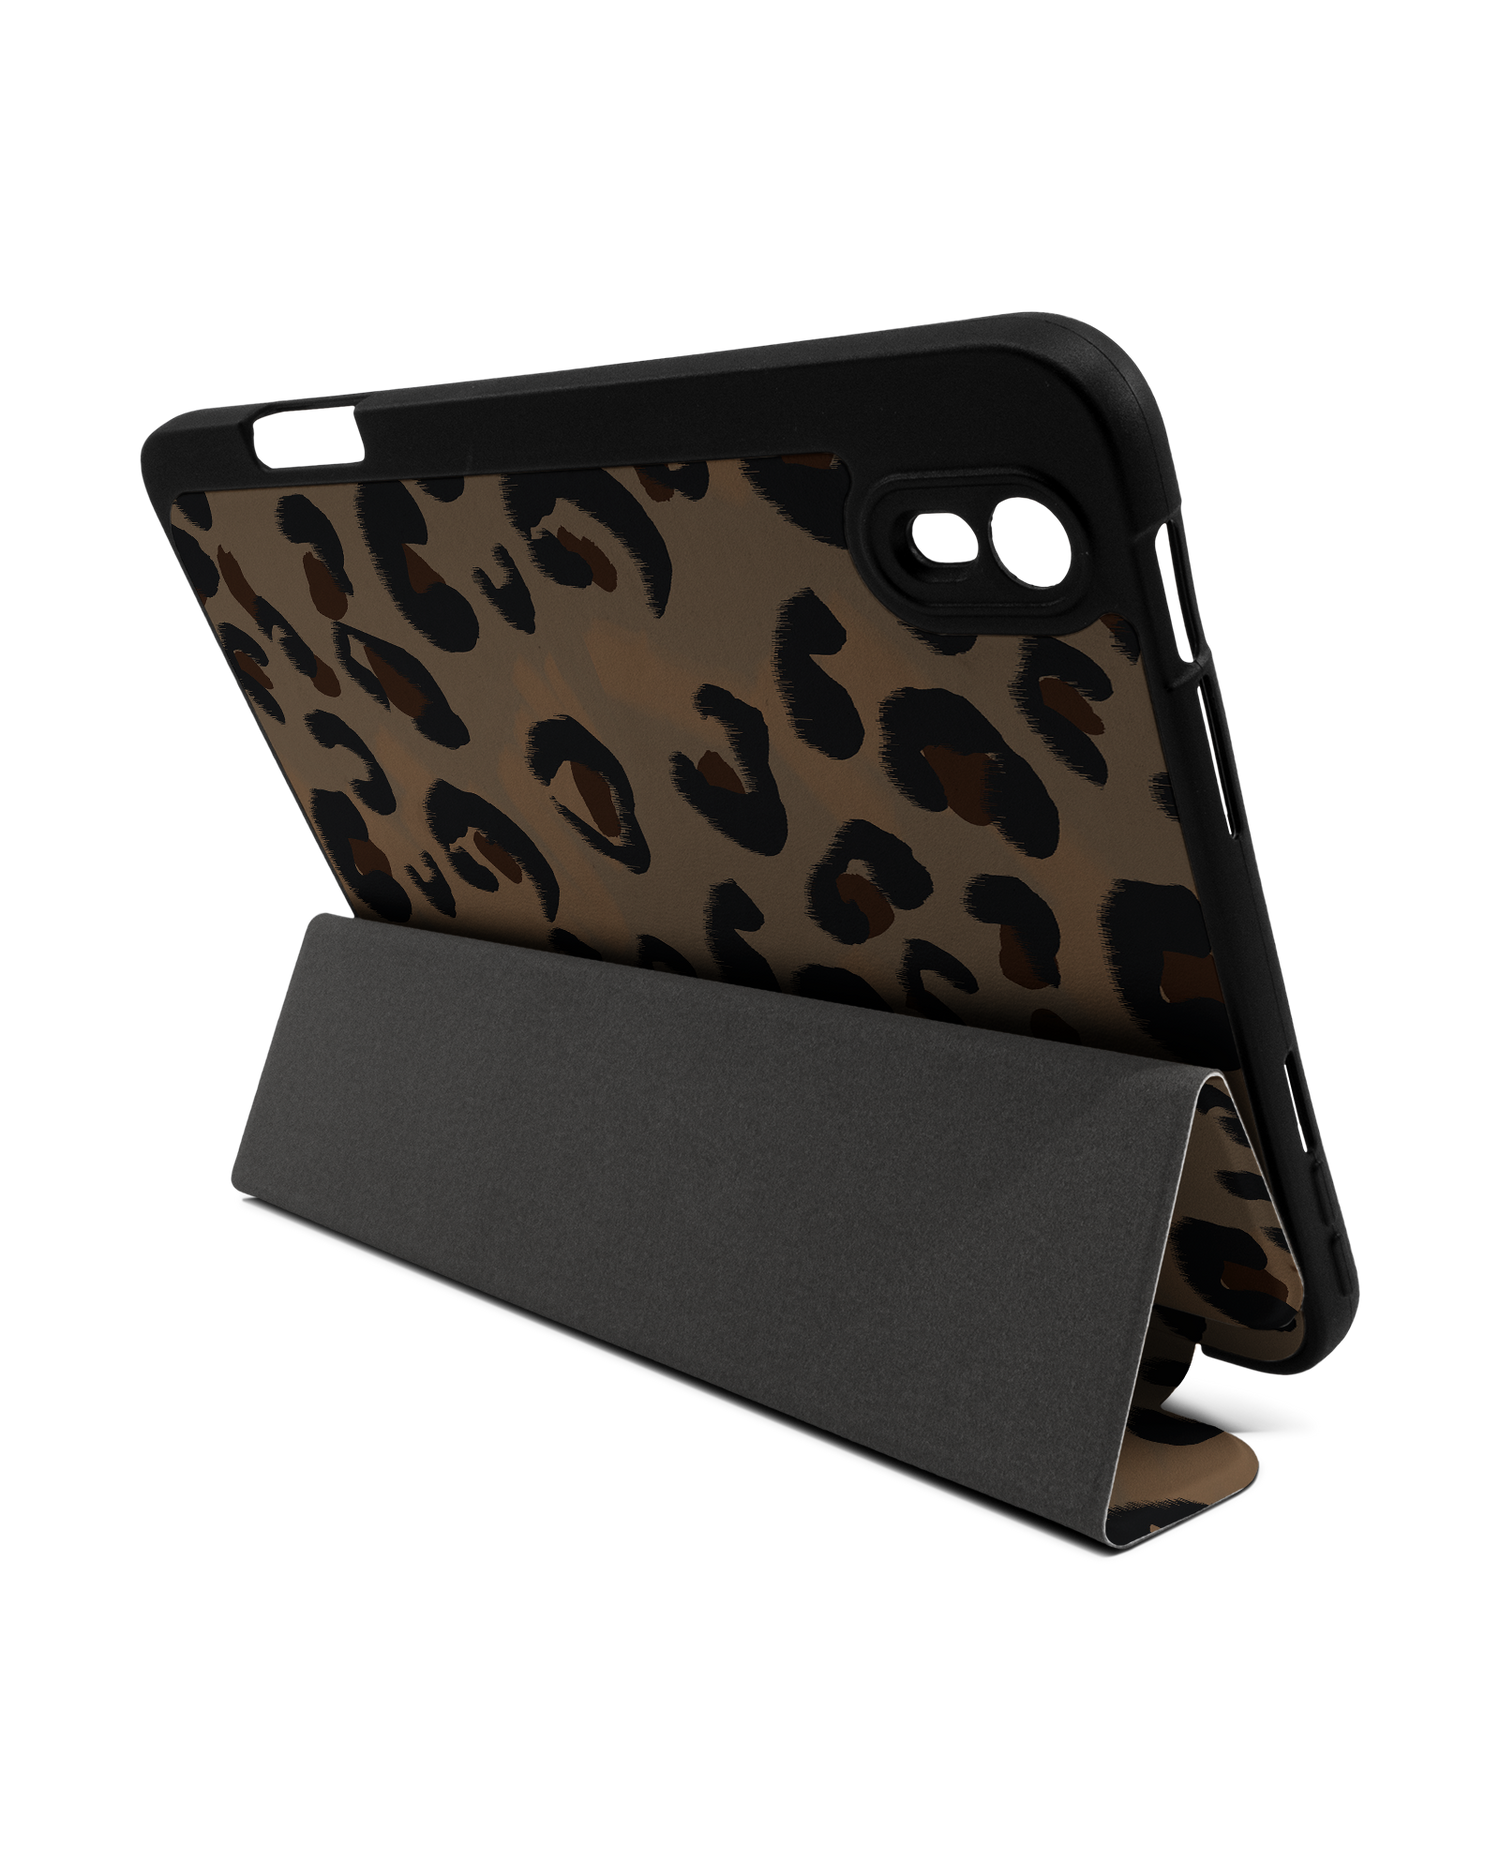 Leopard Repeat iPad Case with Pencil Holder Apple iPad mini 6 (2021): Set up in landscape format (back view)